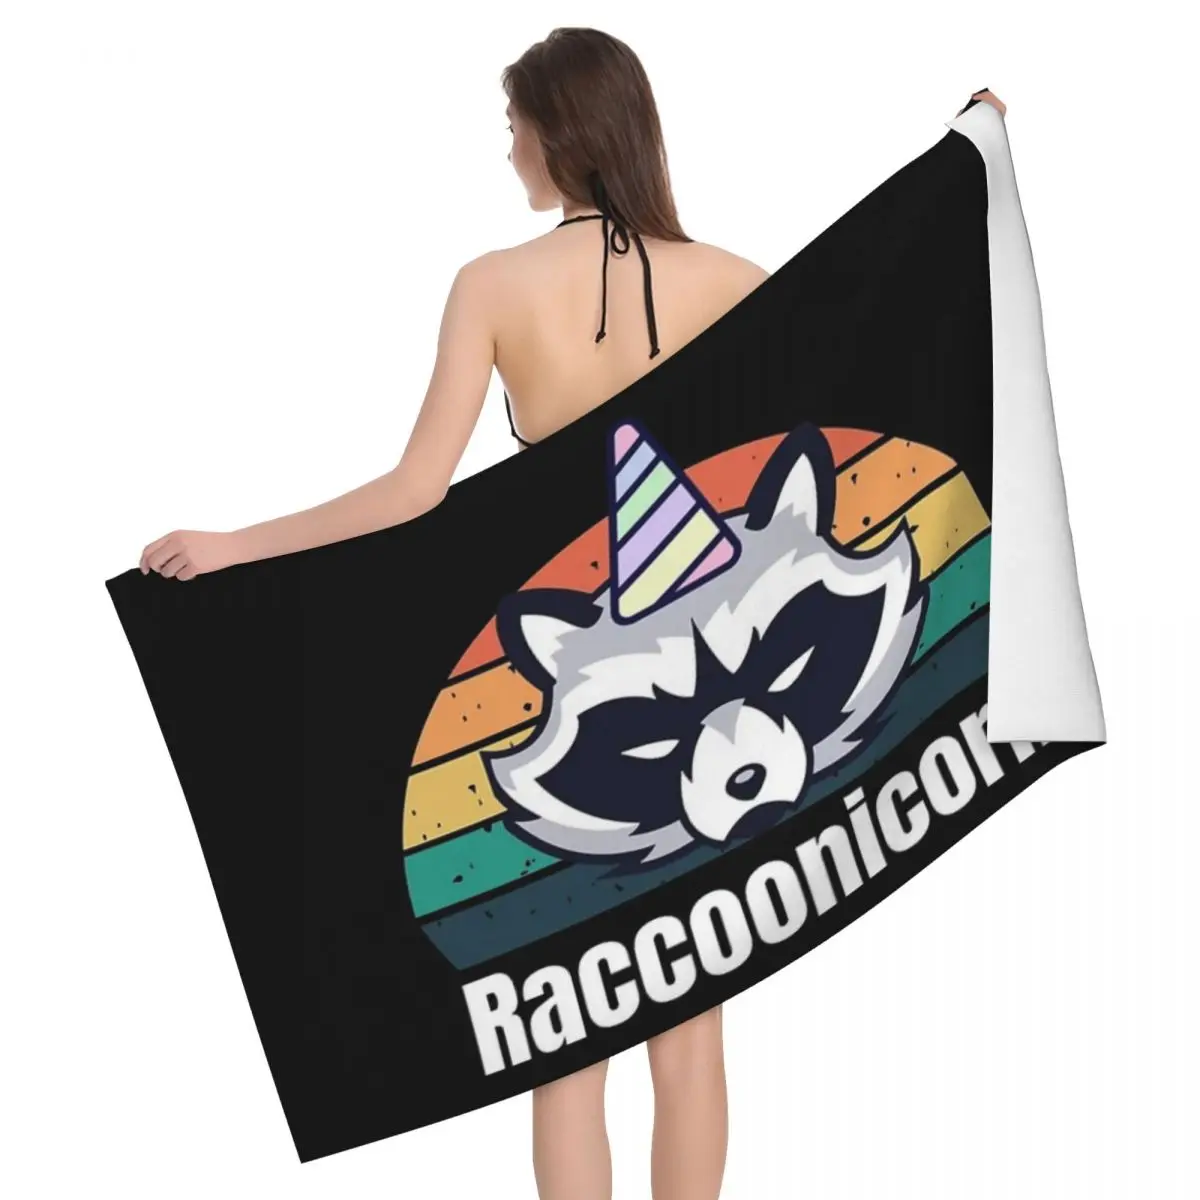 

Angry Raccoonicorn 80x130cm Bath Towel Water-absorbent For Travelling For Traveller